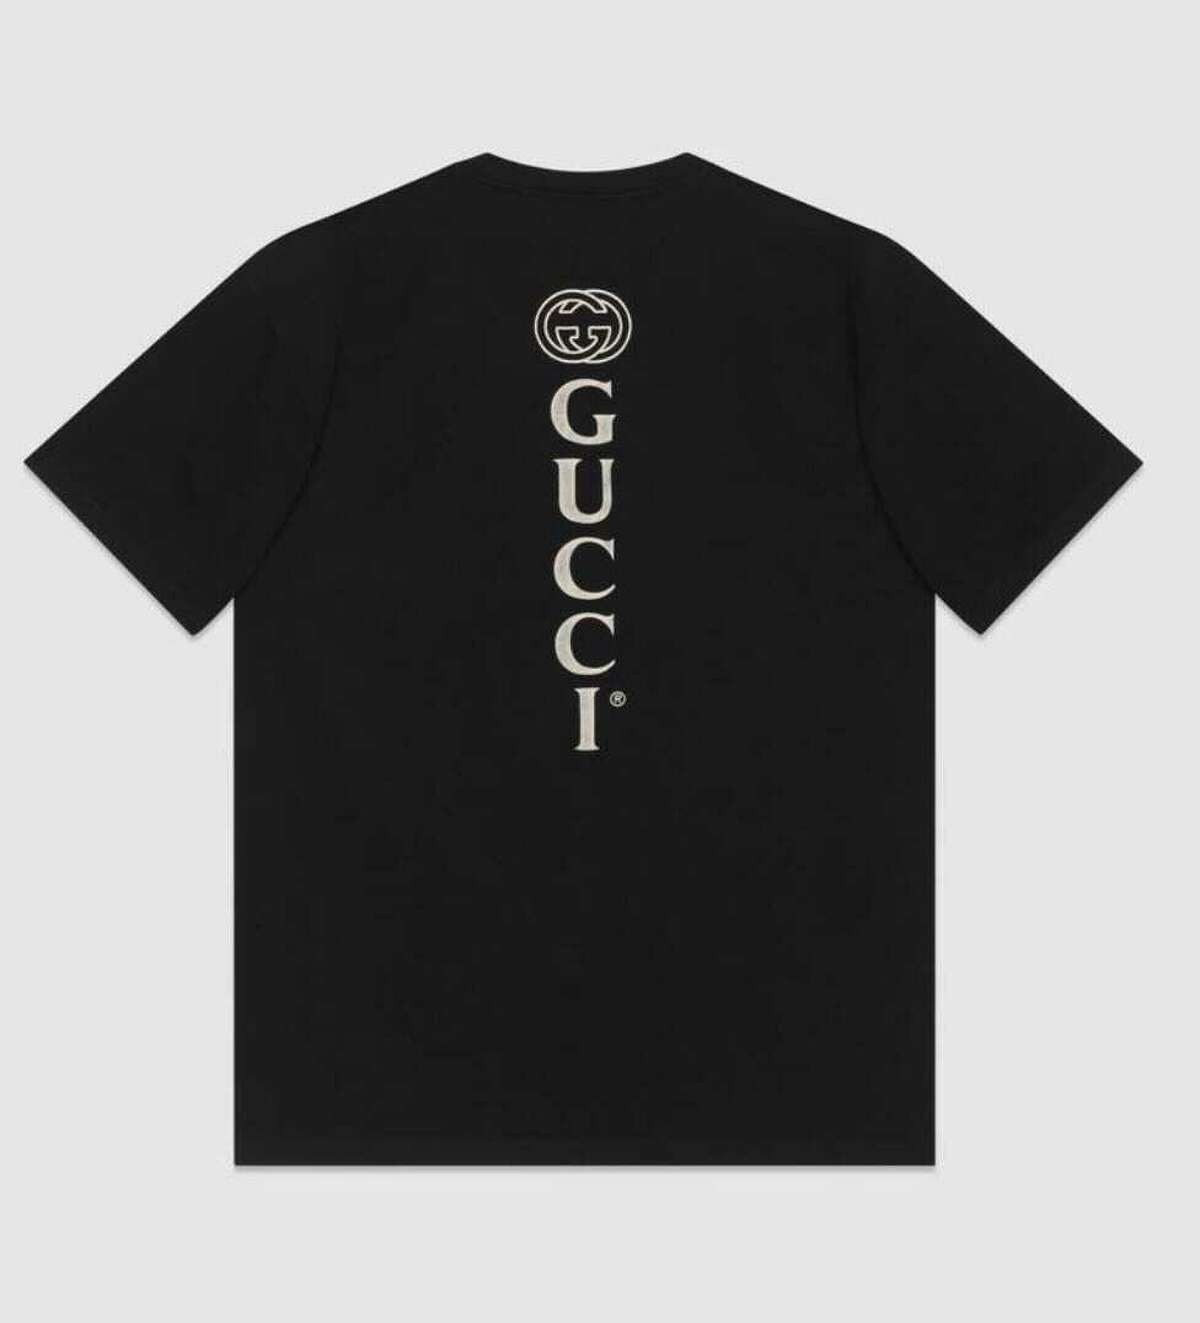 Here's how Gucci missed the mark with 'Houston VS. Everybody' T-shirts